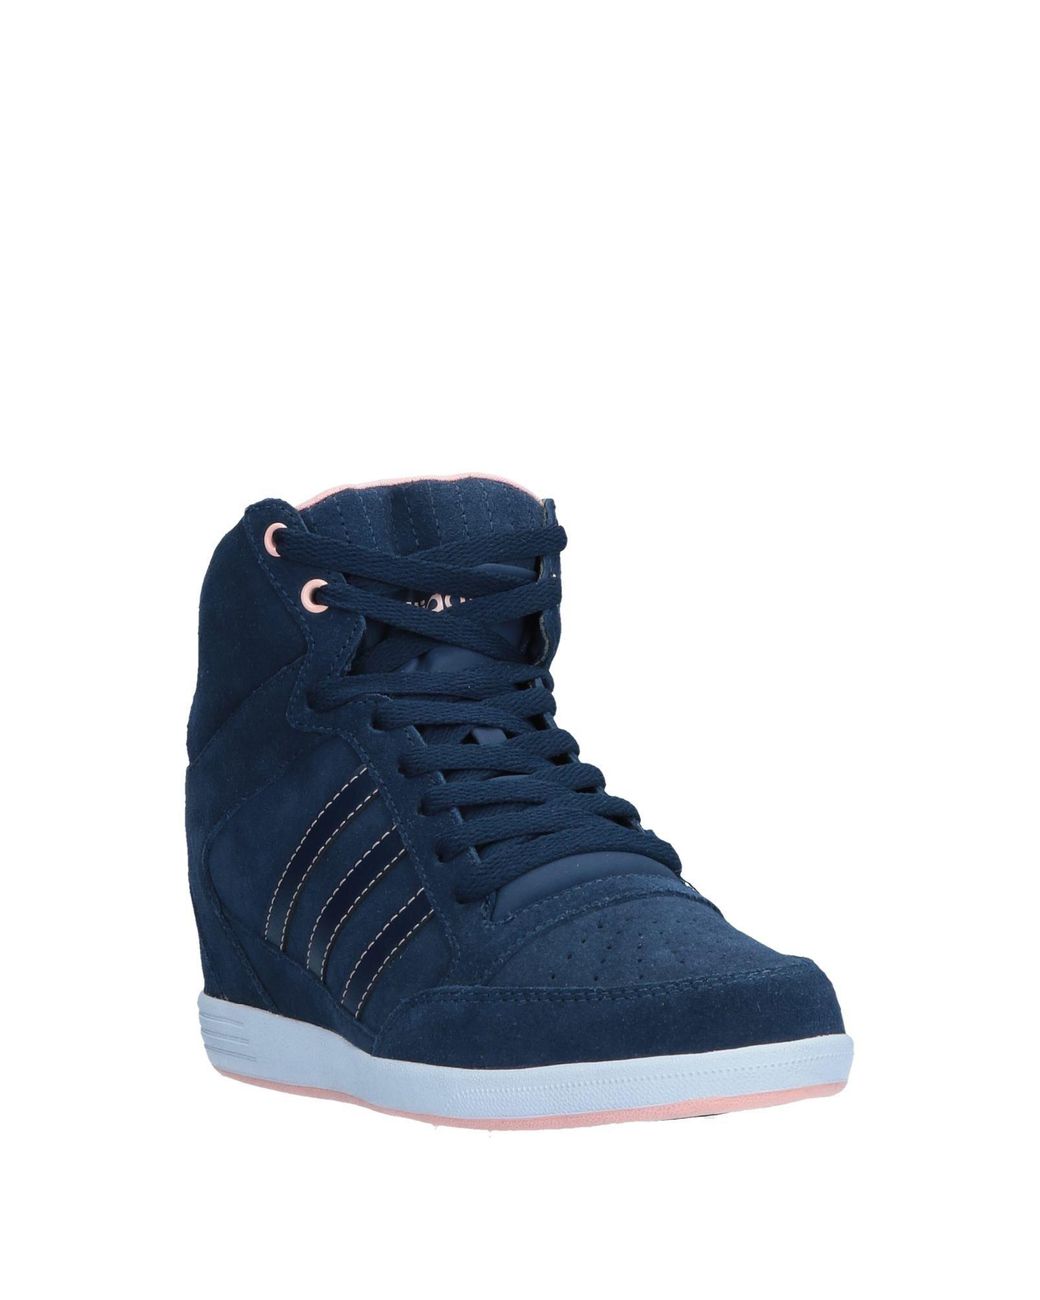 Adidas Neo High-tops & Sneakers in Blue | Lyst